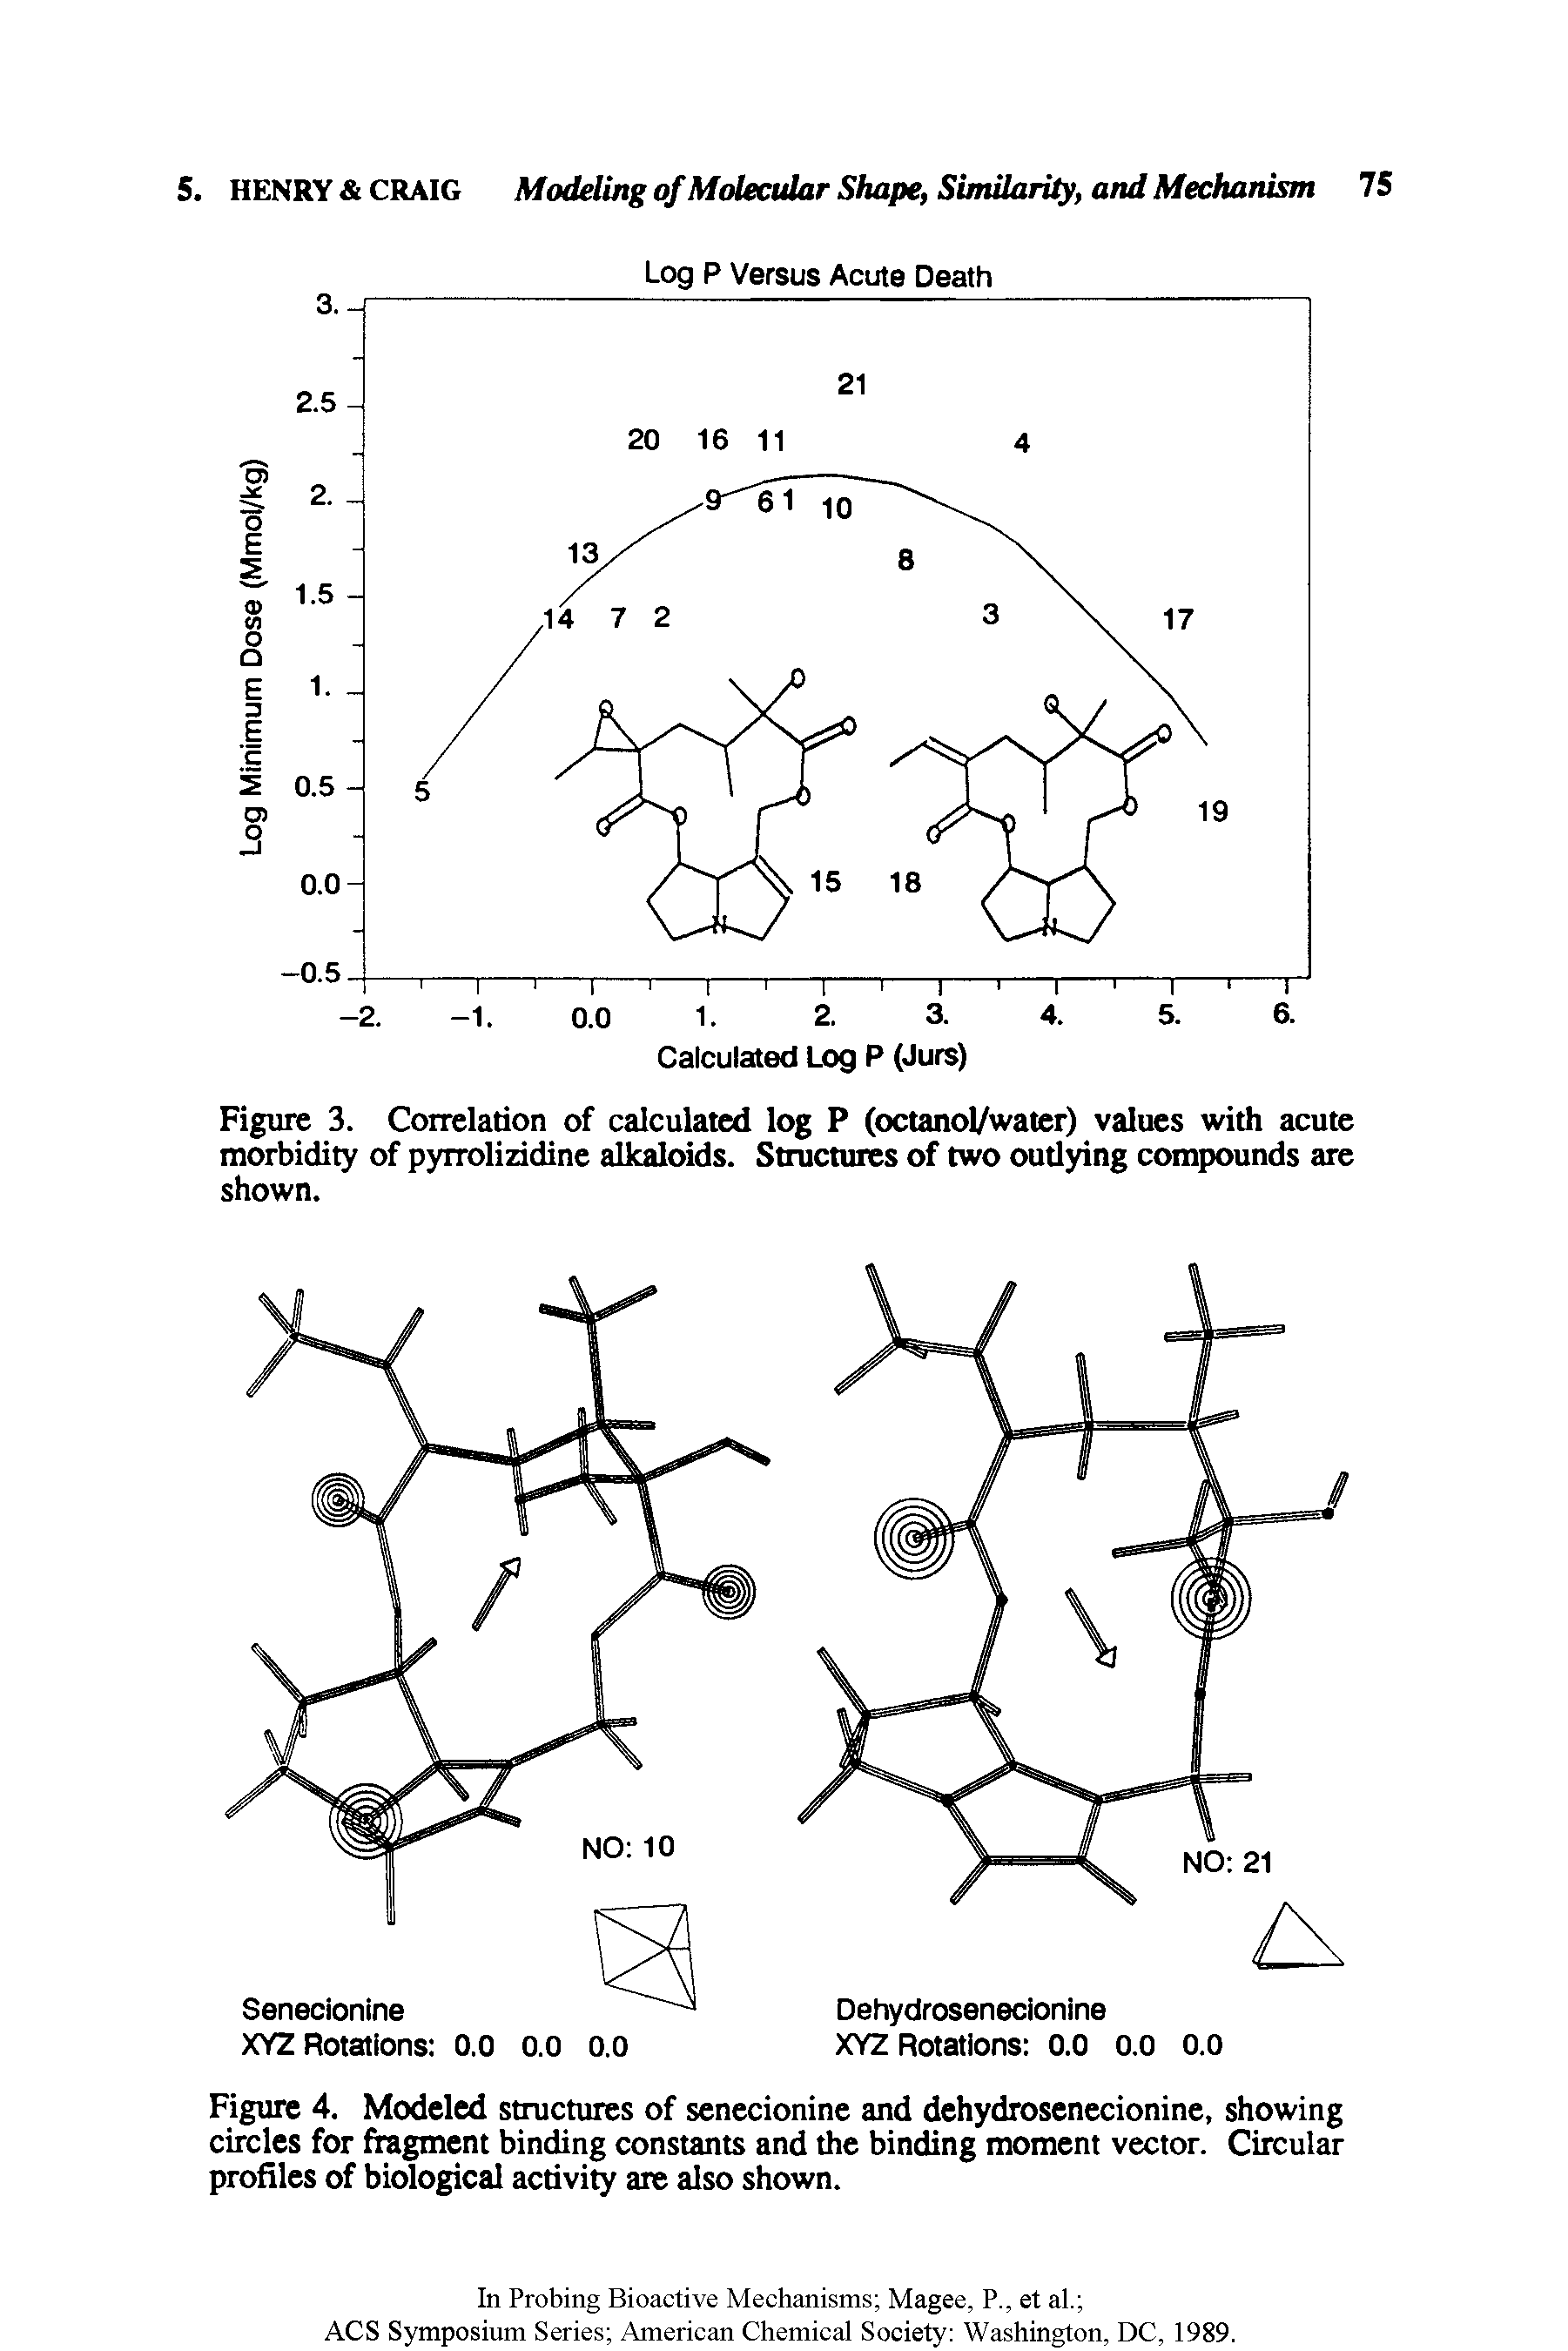 Figure 3. Correlation of calculated log P (octanol/water) values with acute morbidity of pyrrolizidine alkaloids. Structures of two oudying compounds are shown.